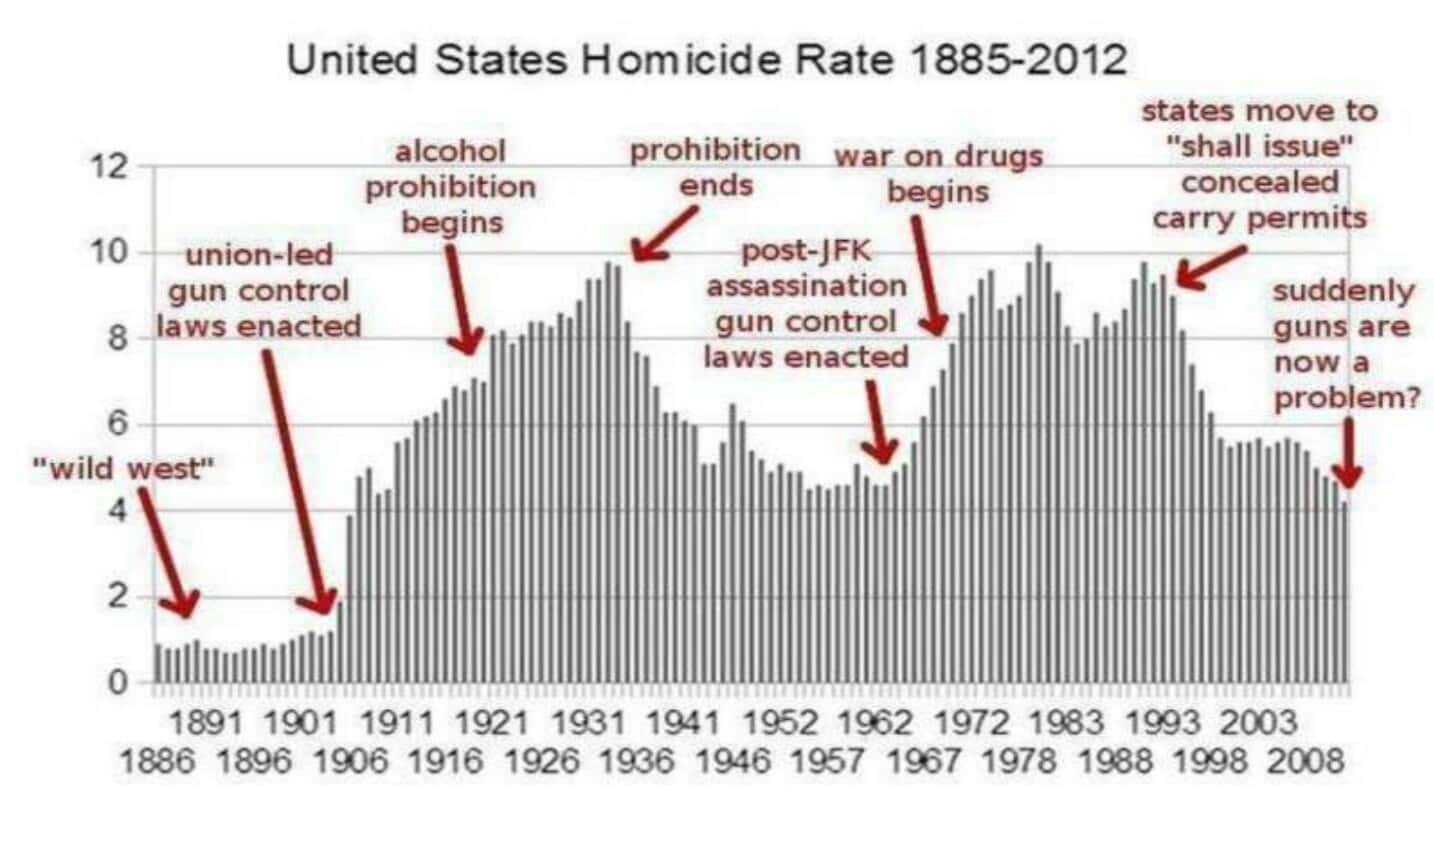 United States homicide rate 1885-2012